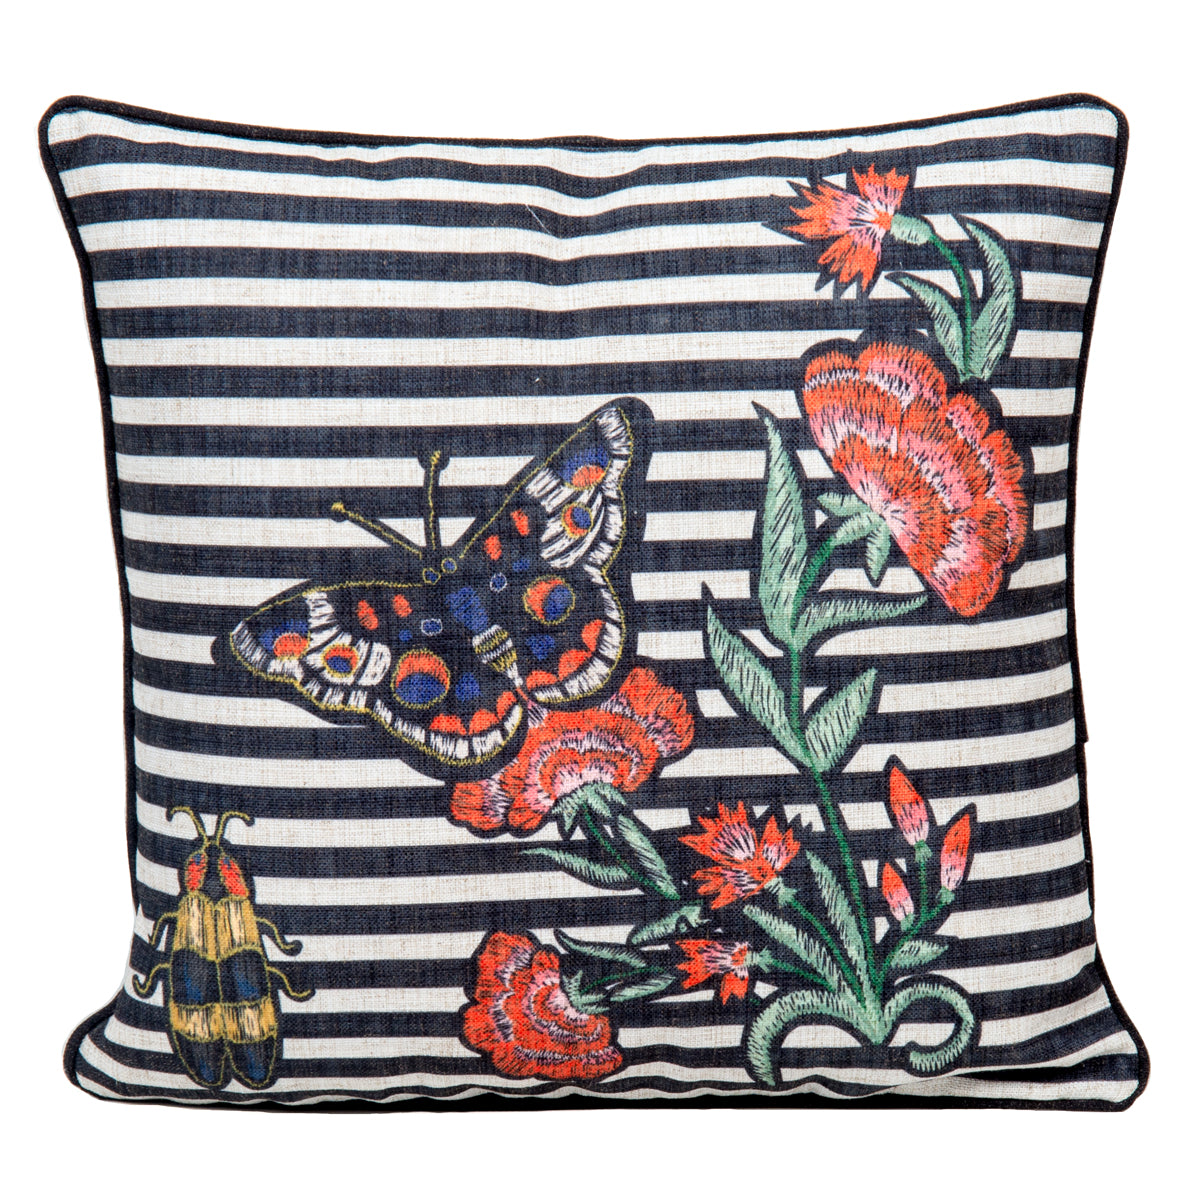 Black and white striped throw pillow with colorful butterflies and red flowers embroidered on the front.